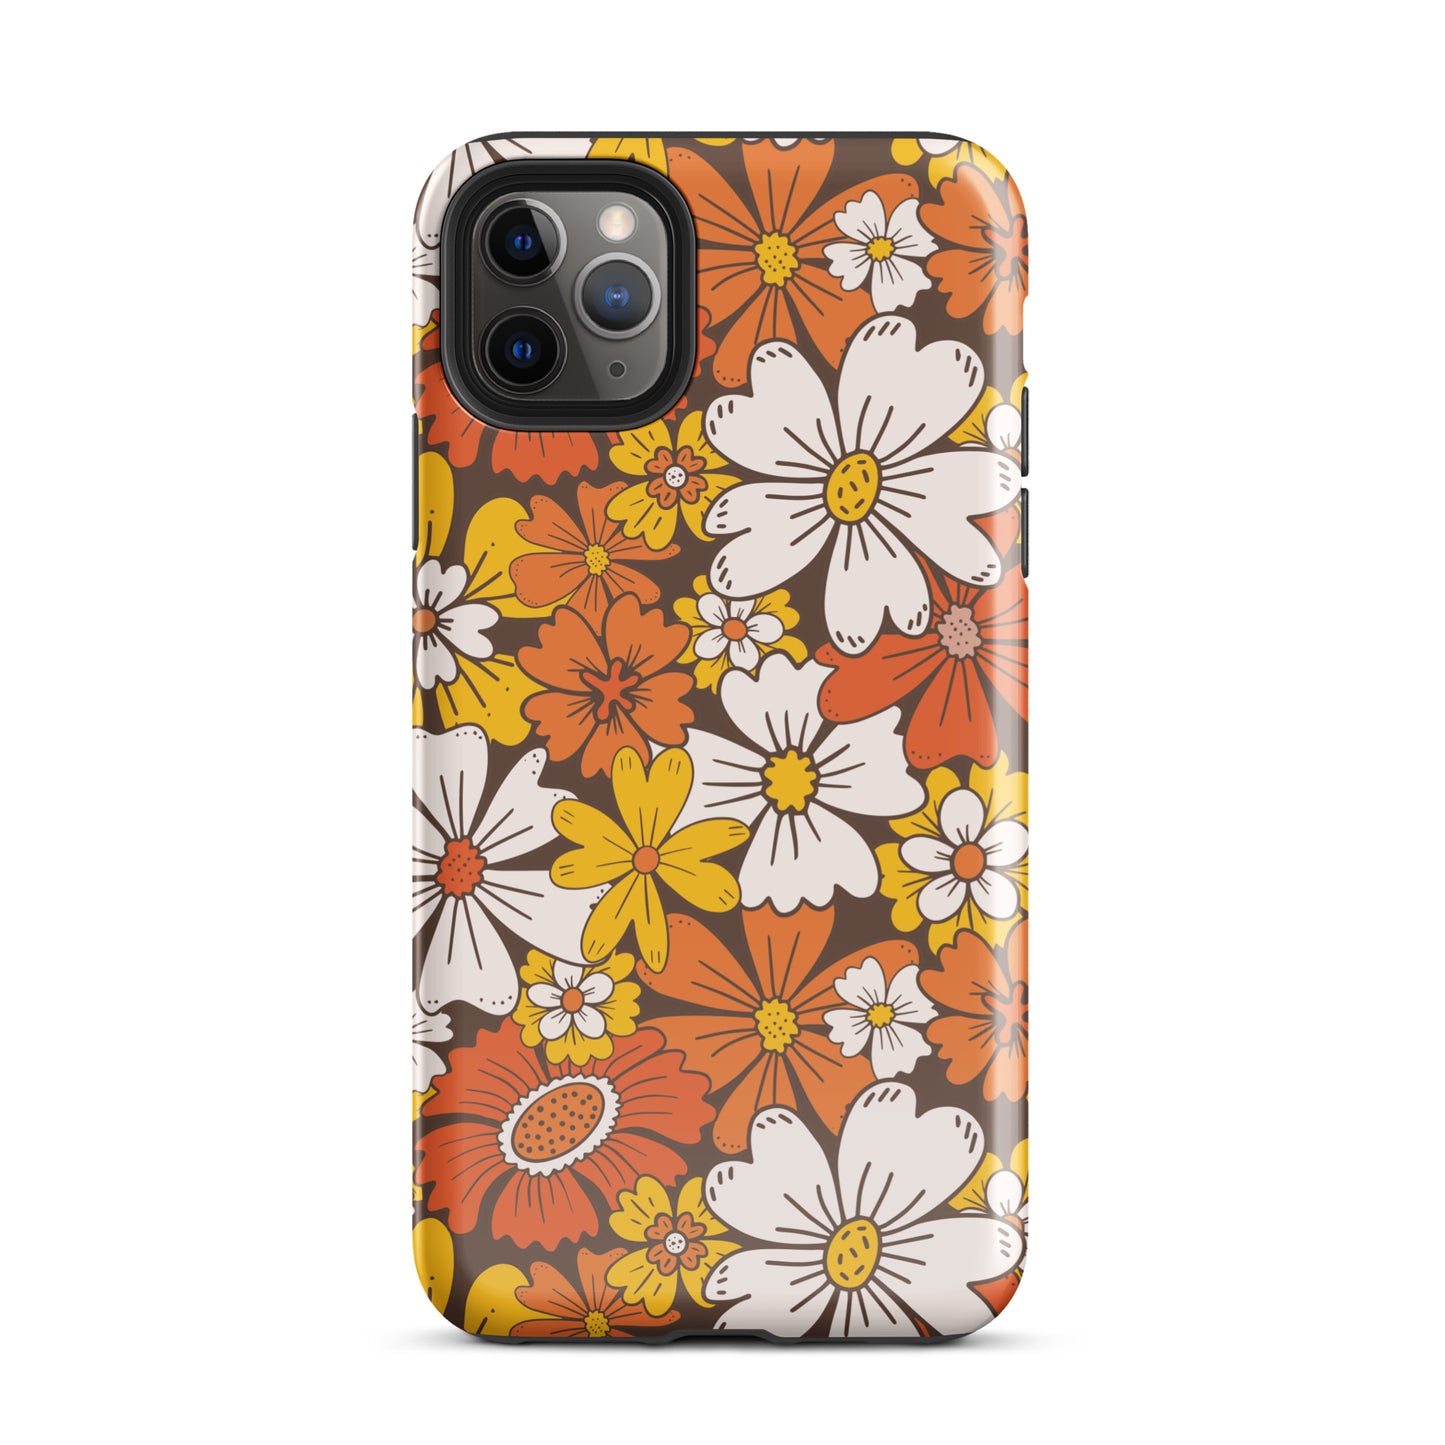 Retro Bloom iPhone Case iPhone 11 Pro Max Glossy